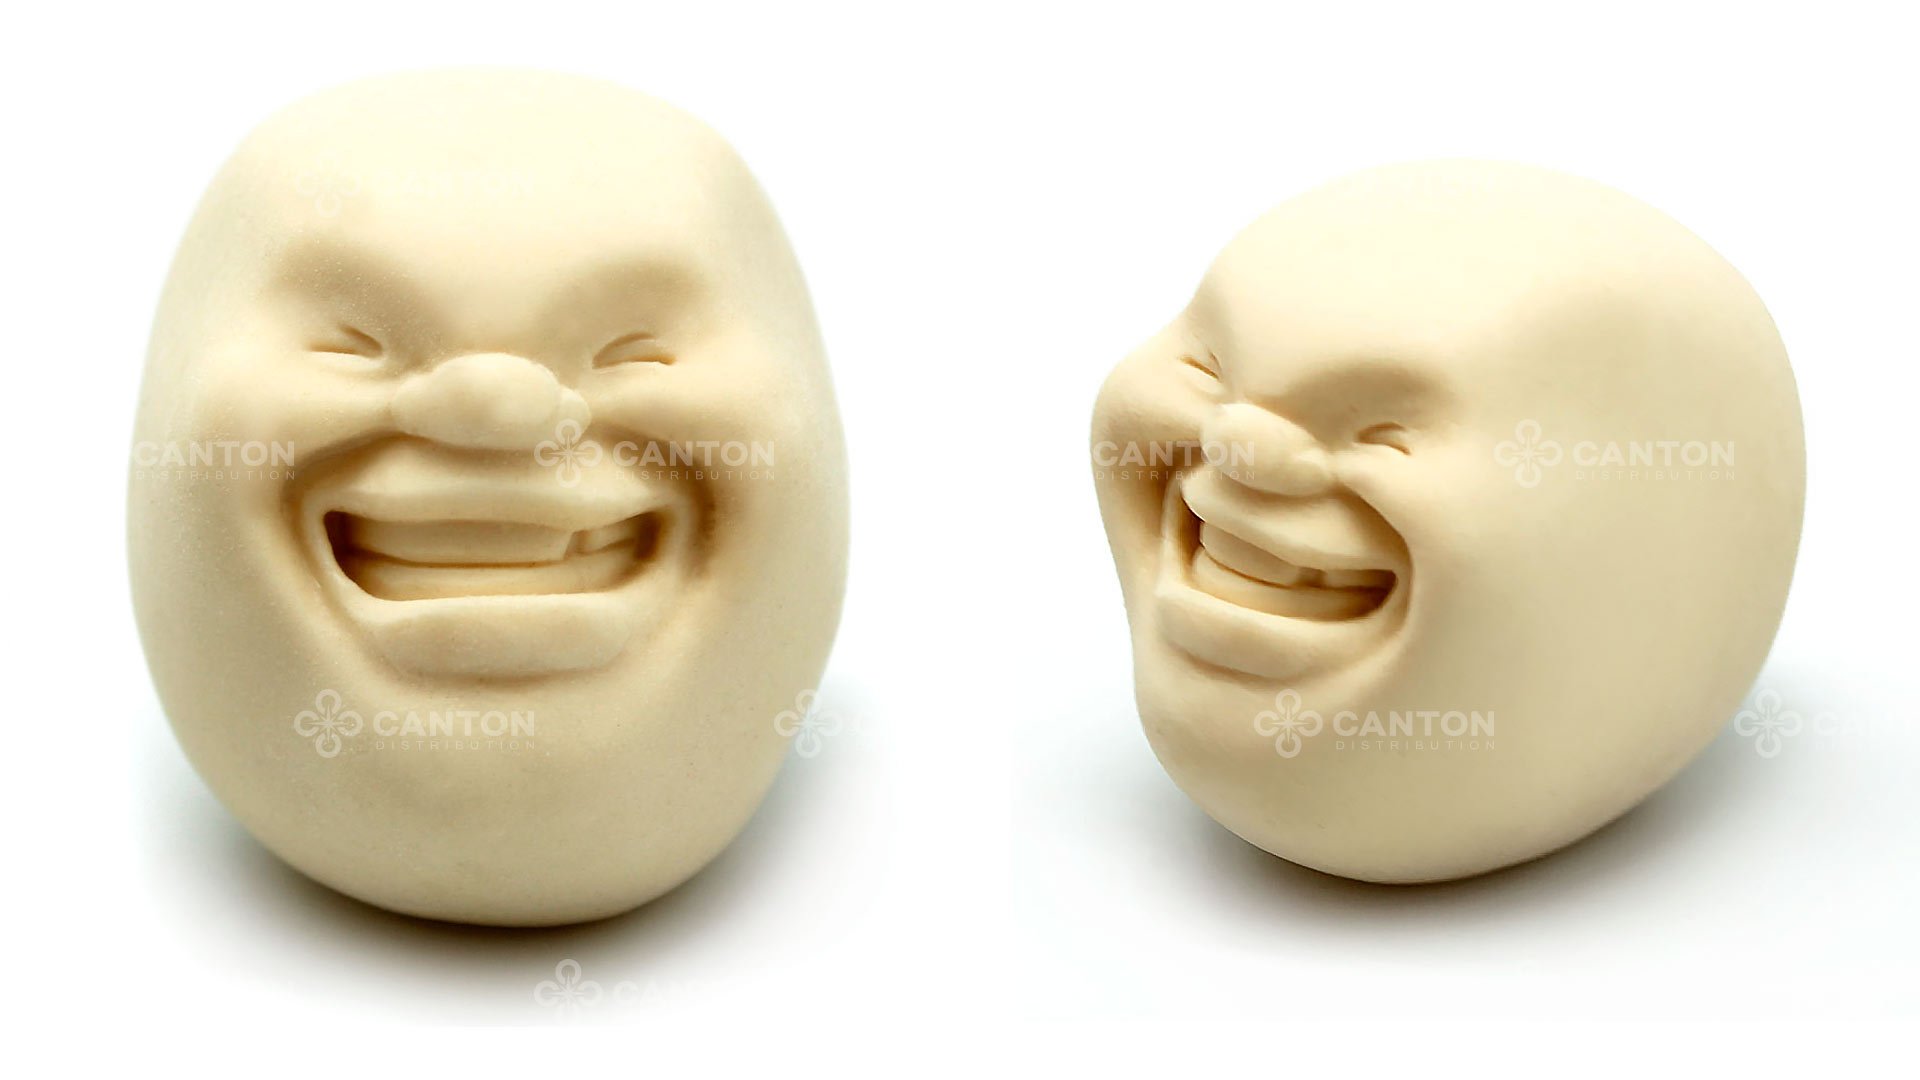 stress relief faces made of pu durable foam